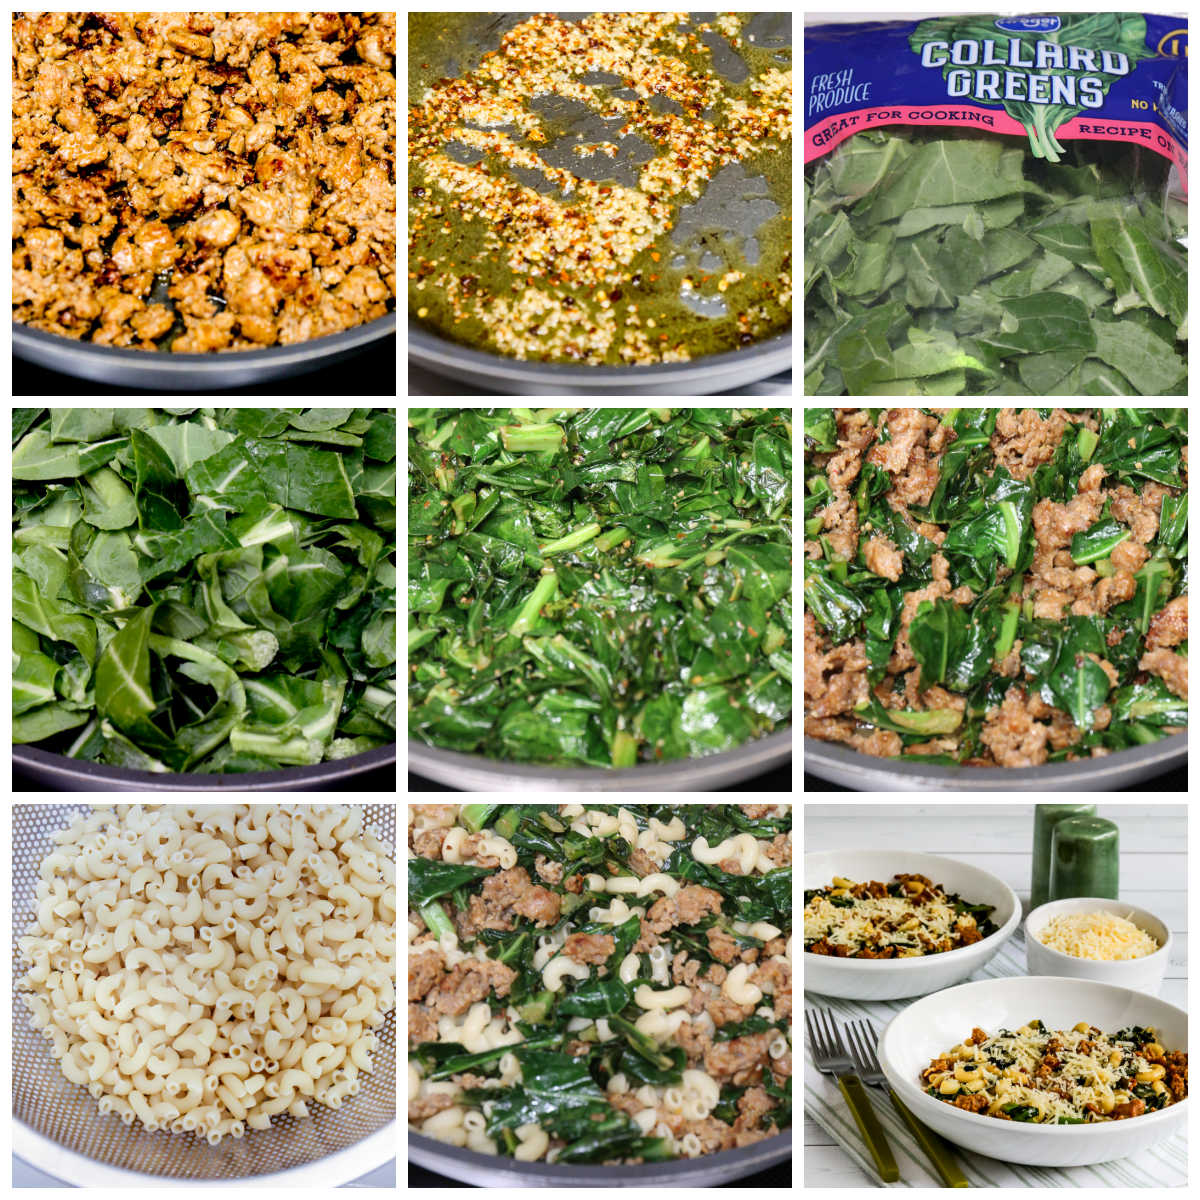 Italian Sausage Pasta with Collard Greens collage photo of recipe steps.